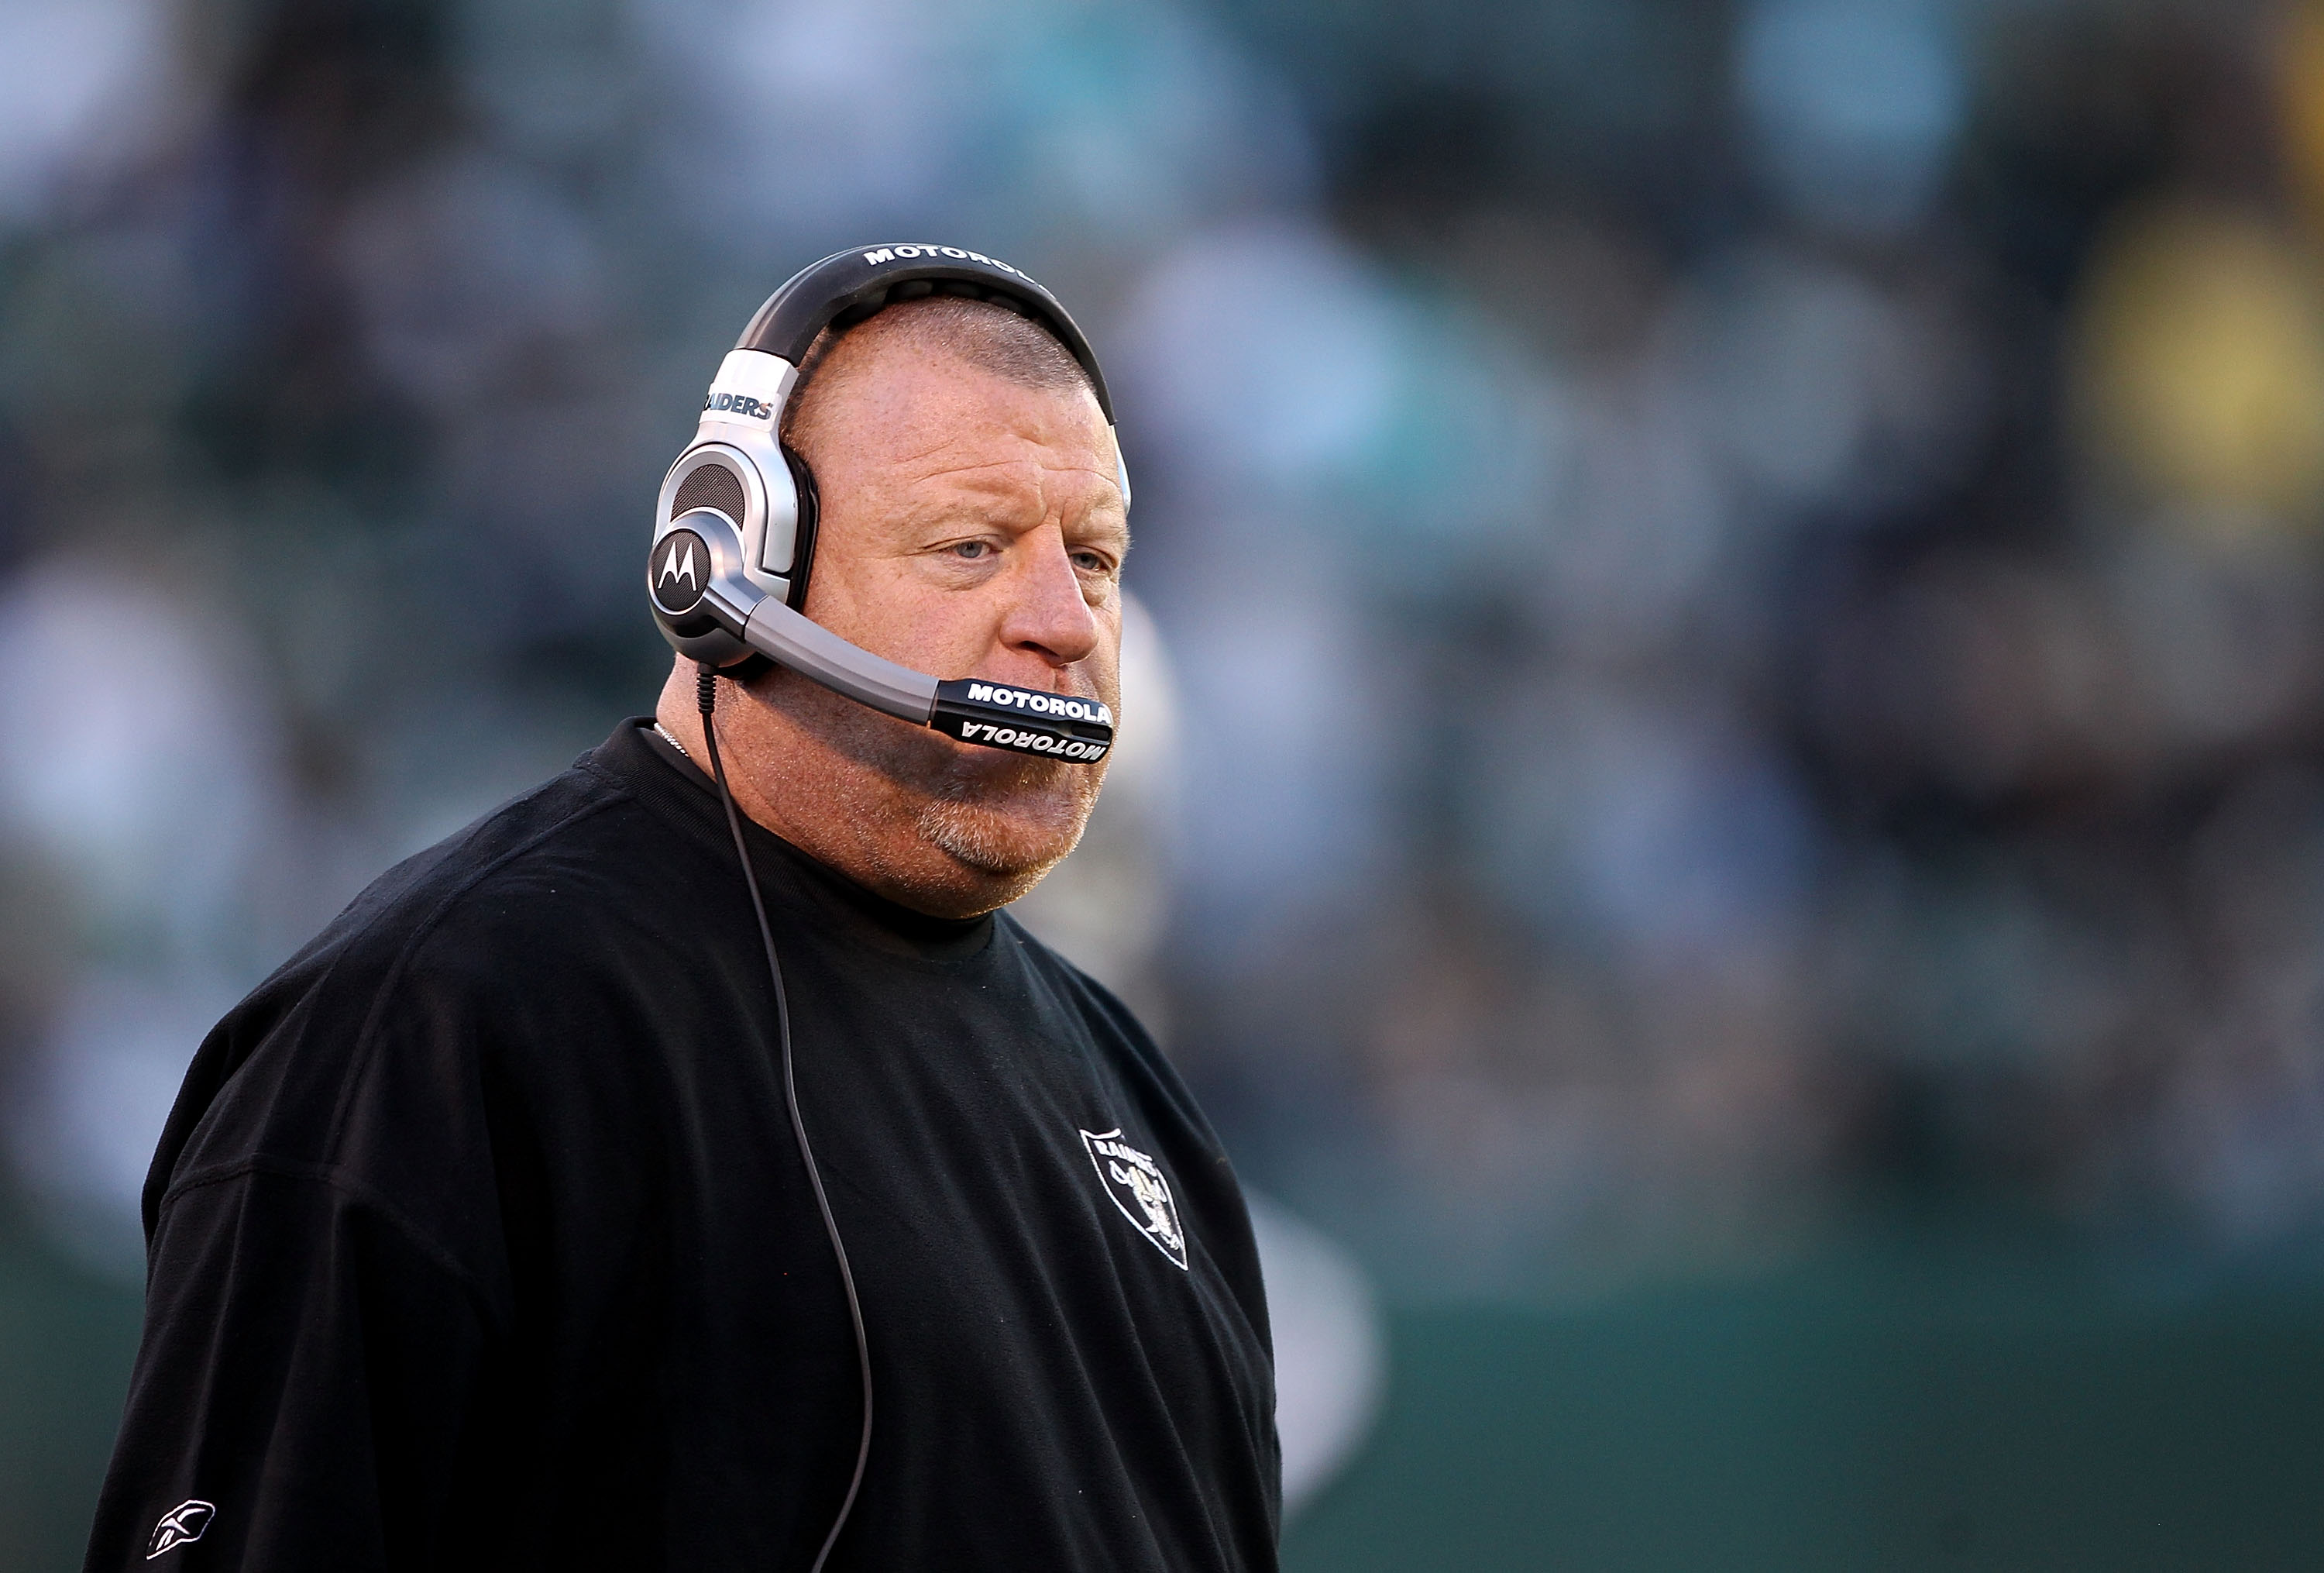 OAKLAND, CA - NOVEMBER 28:  Head coach Tom Cable of the Oakland Raiders walks the sidelines during the closing minutes of their loss to the Miami Dolphins at Oakland-Alameda County Coliseum on November 28, 2010 in Oakland, California.  (Photo by Ezra Shaw